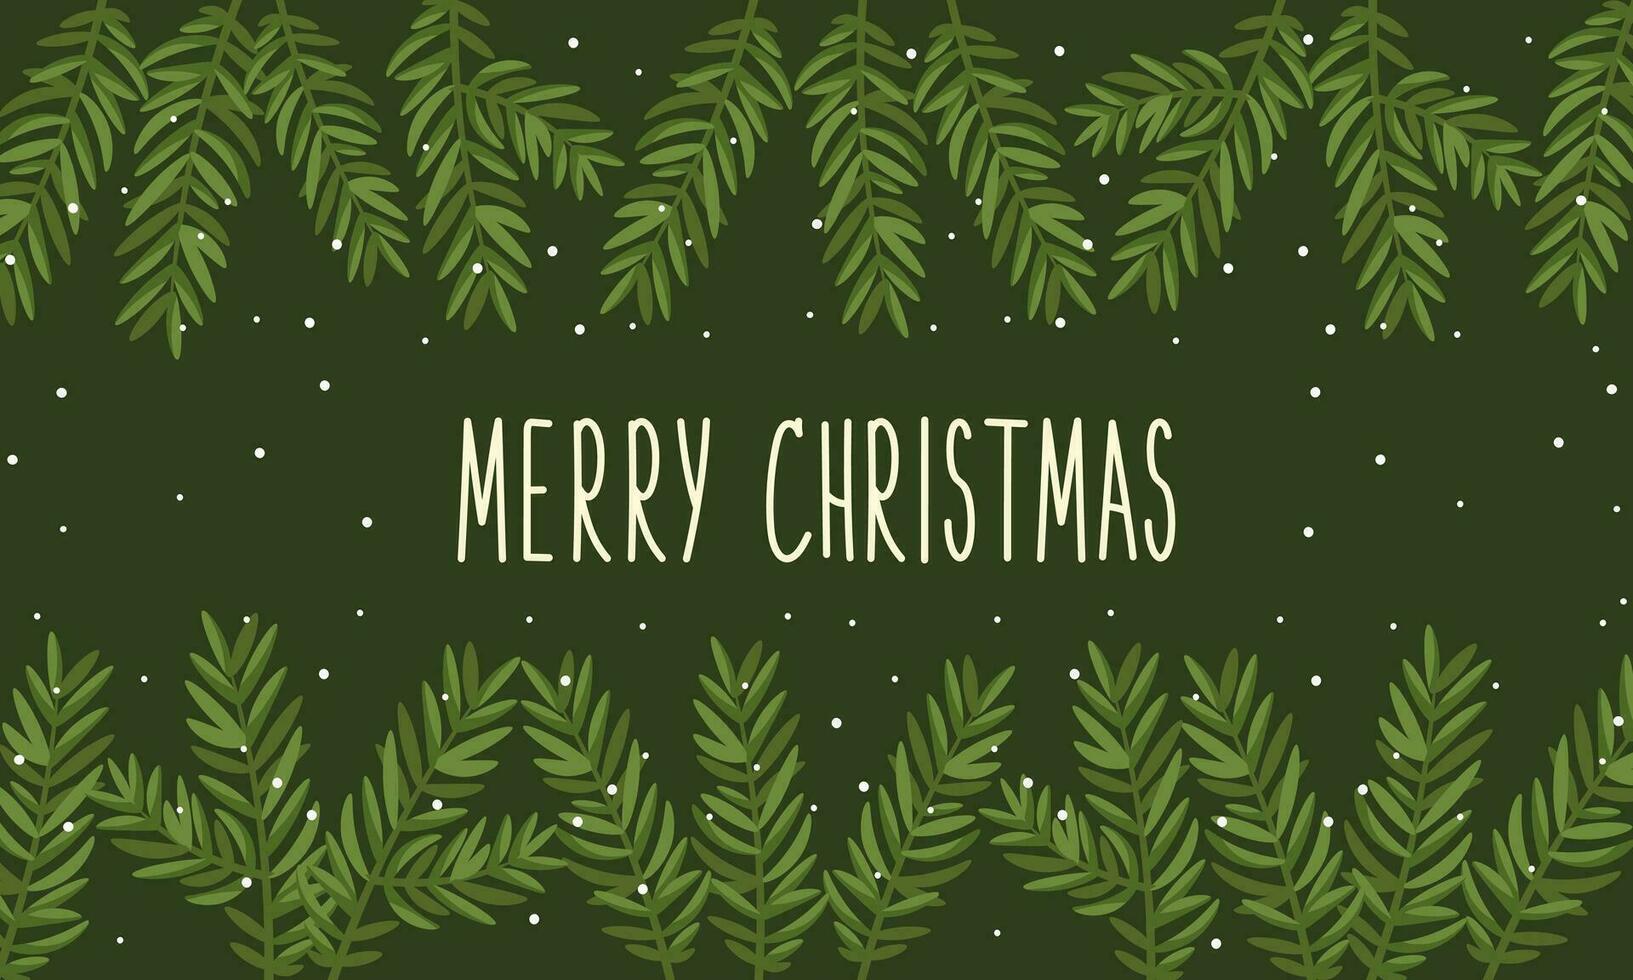 Xmas nature design border, text Merry Christmas. Green pine, fir twigs, snowflakes on dark green background. Vector illustration. Greeting banner template. New Year's symbols.